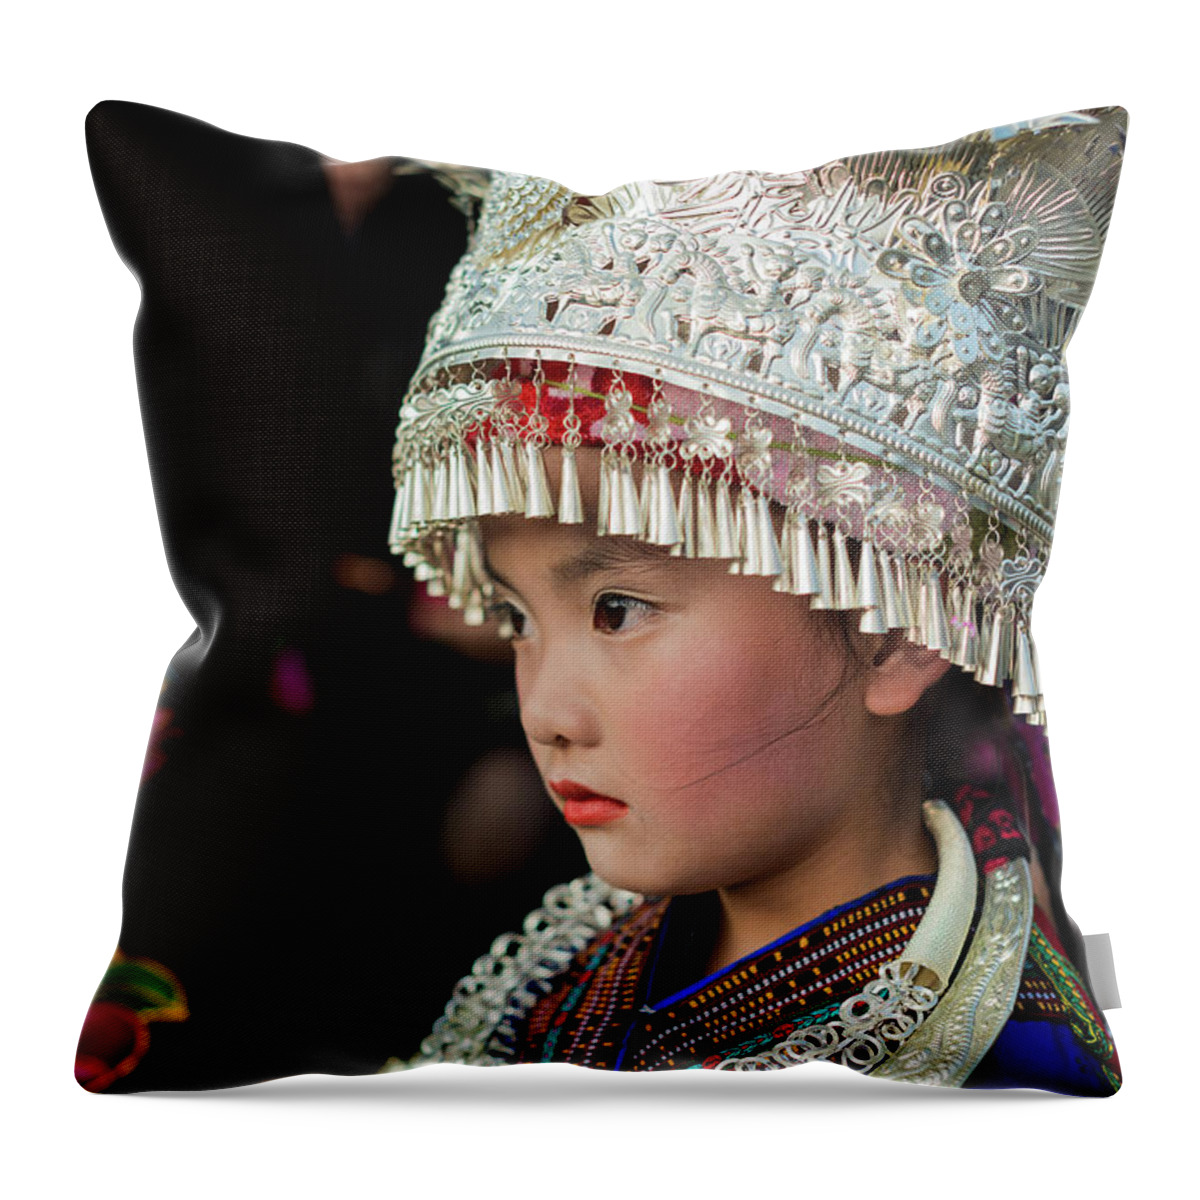 China Throw Pillow featuring the photograph China Doll by Dan McGeorge